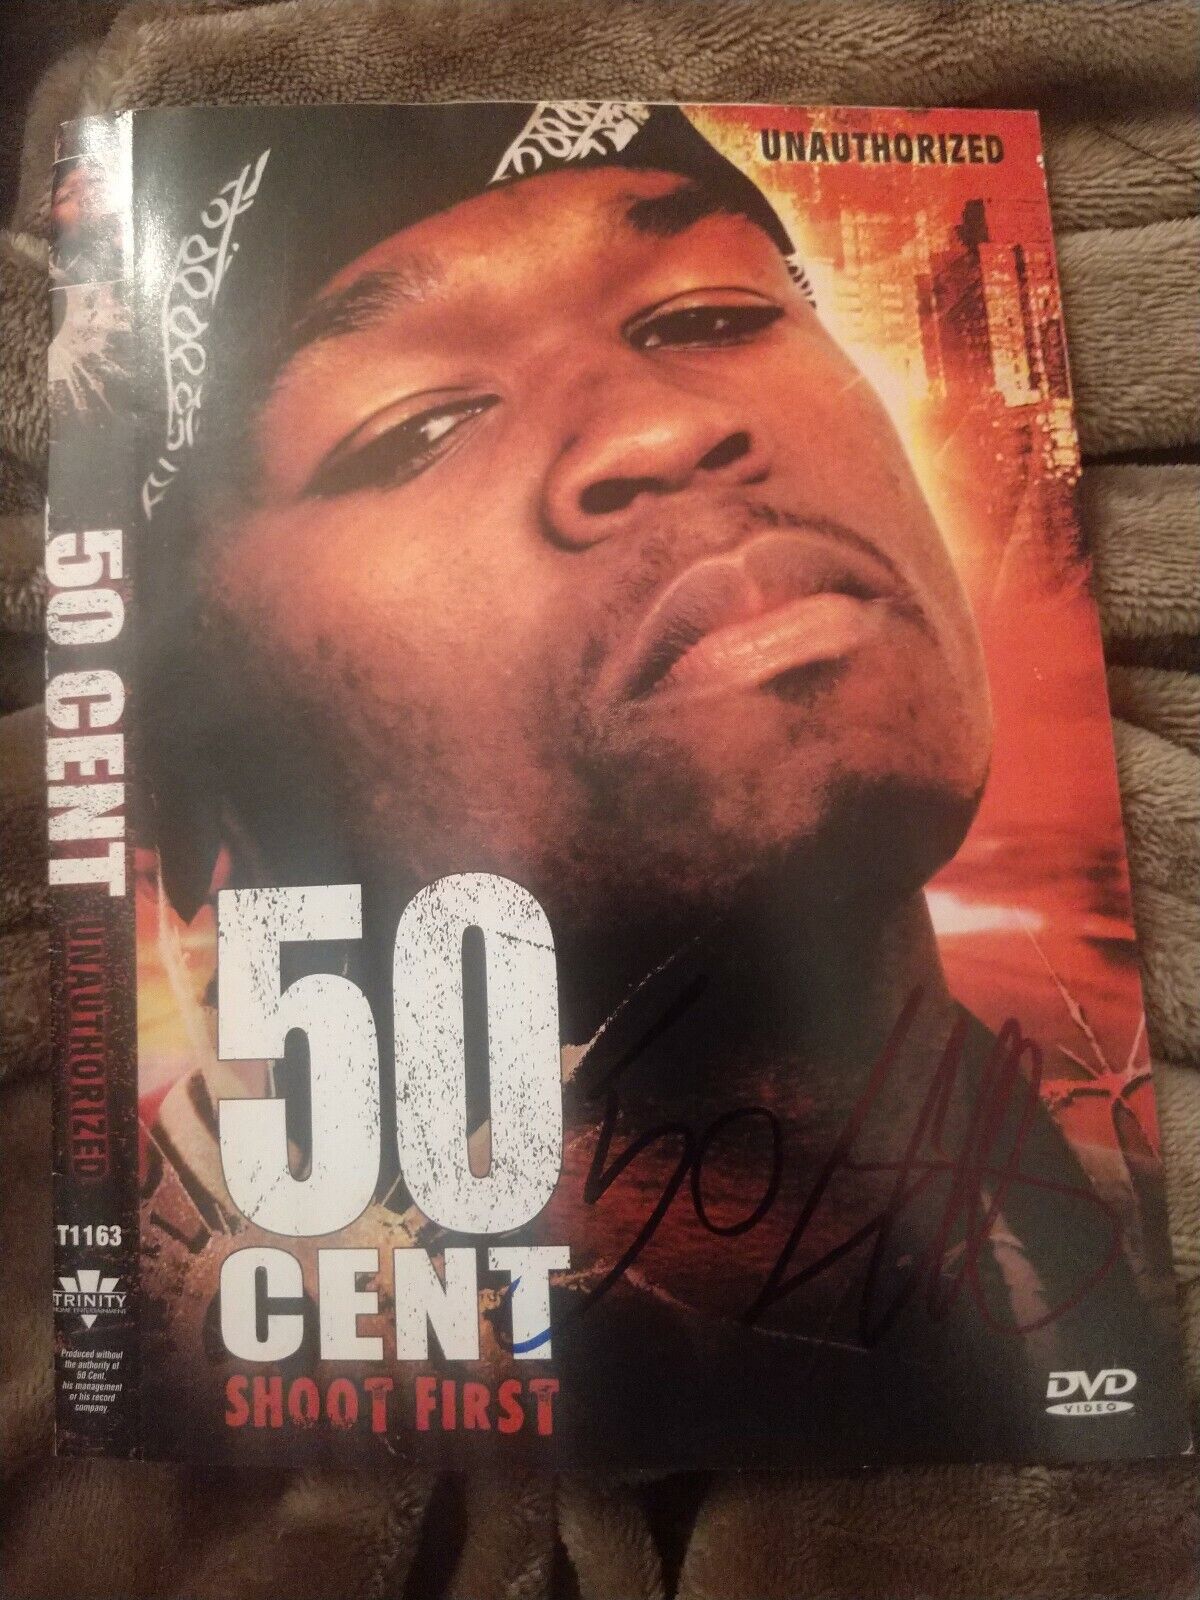 50 CENT SIGNED SHOOT FIRST DVD COVER DIE TRYING RAP LEGEND W/COA+PROOF RARE WOW